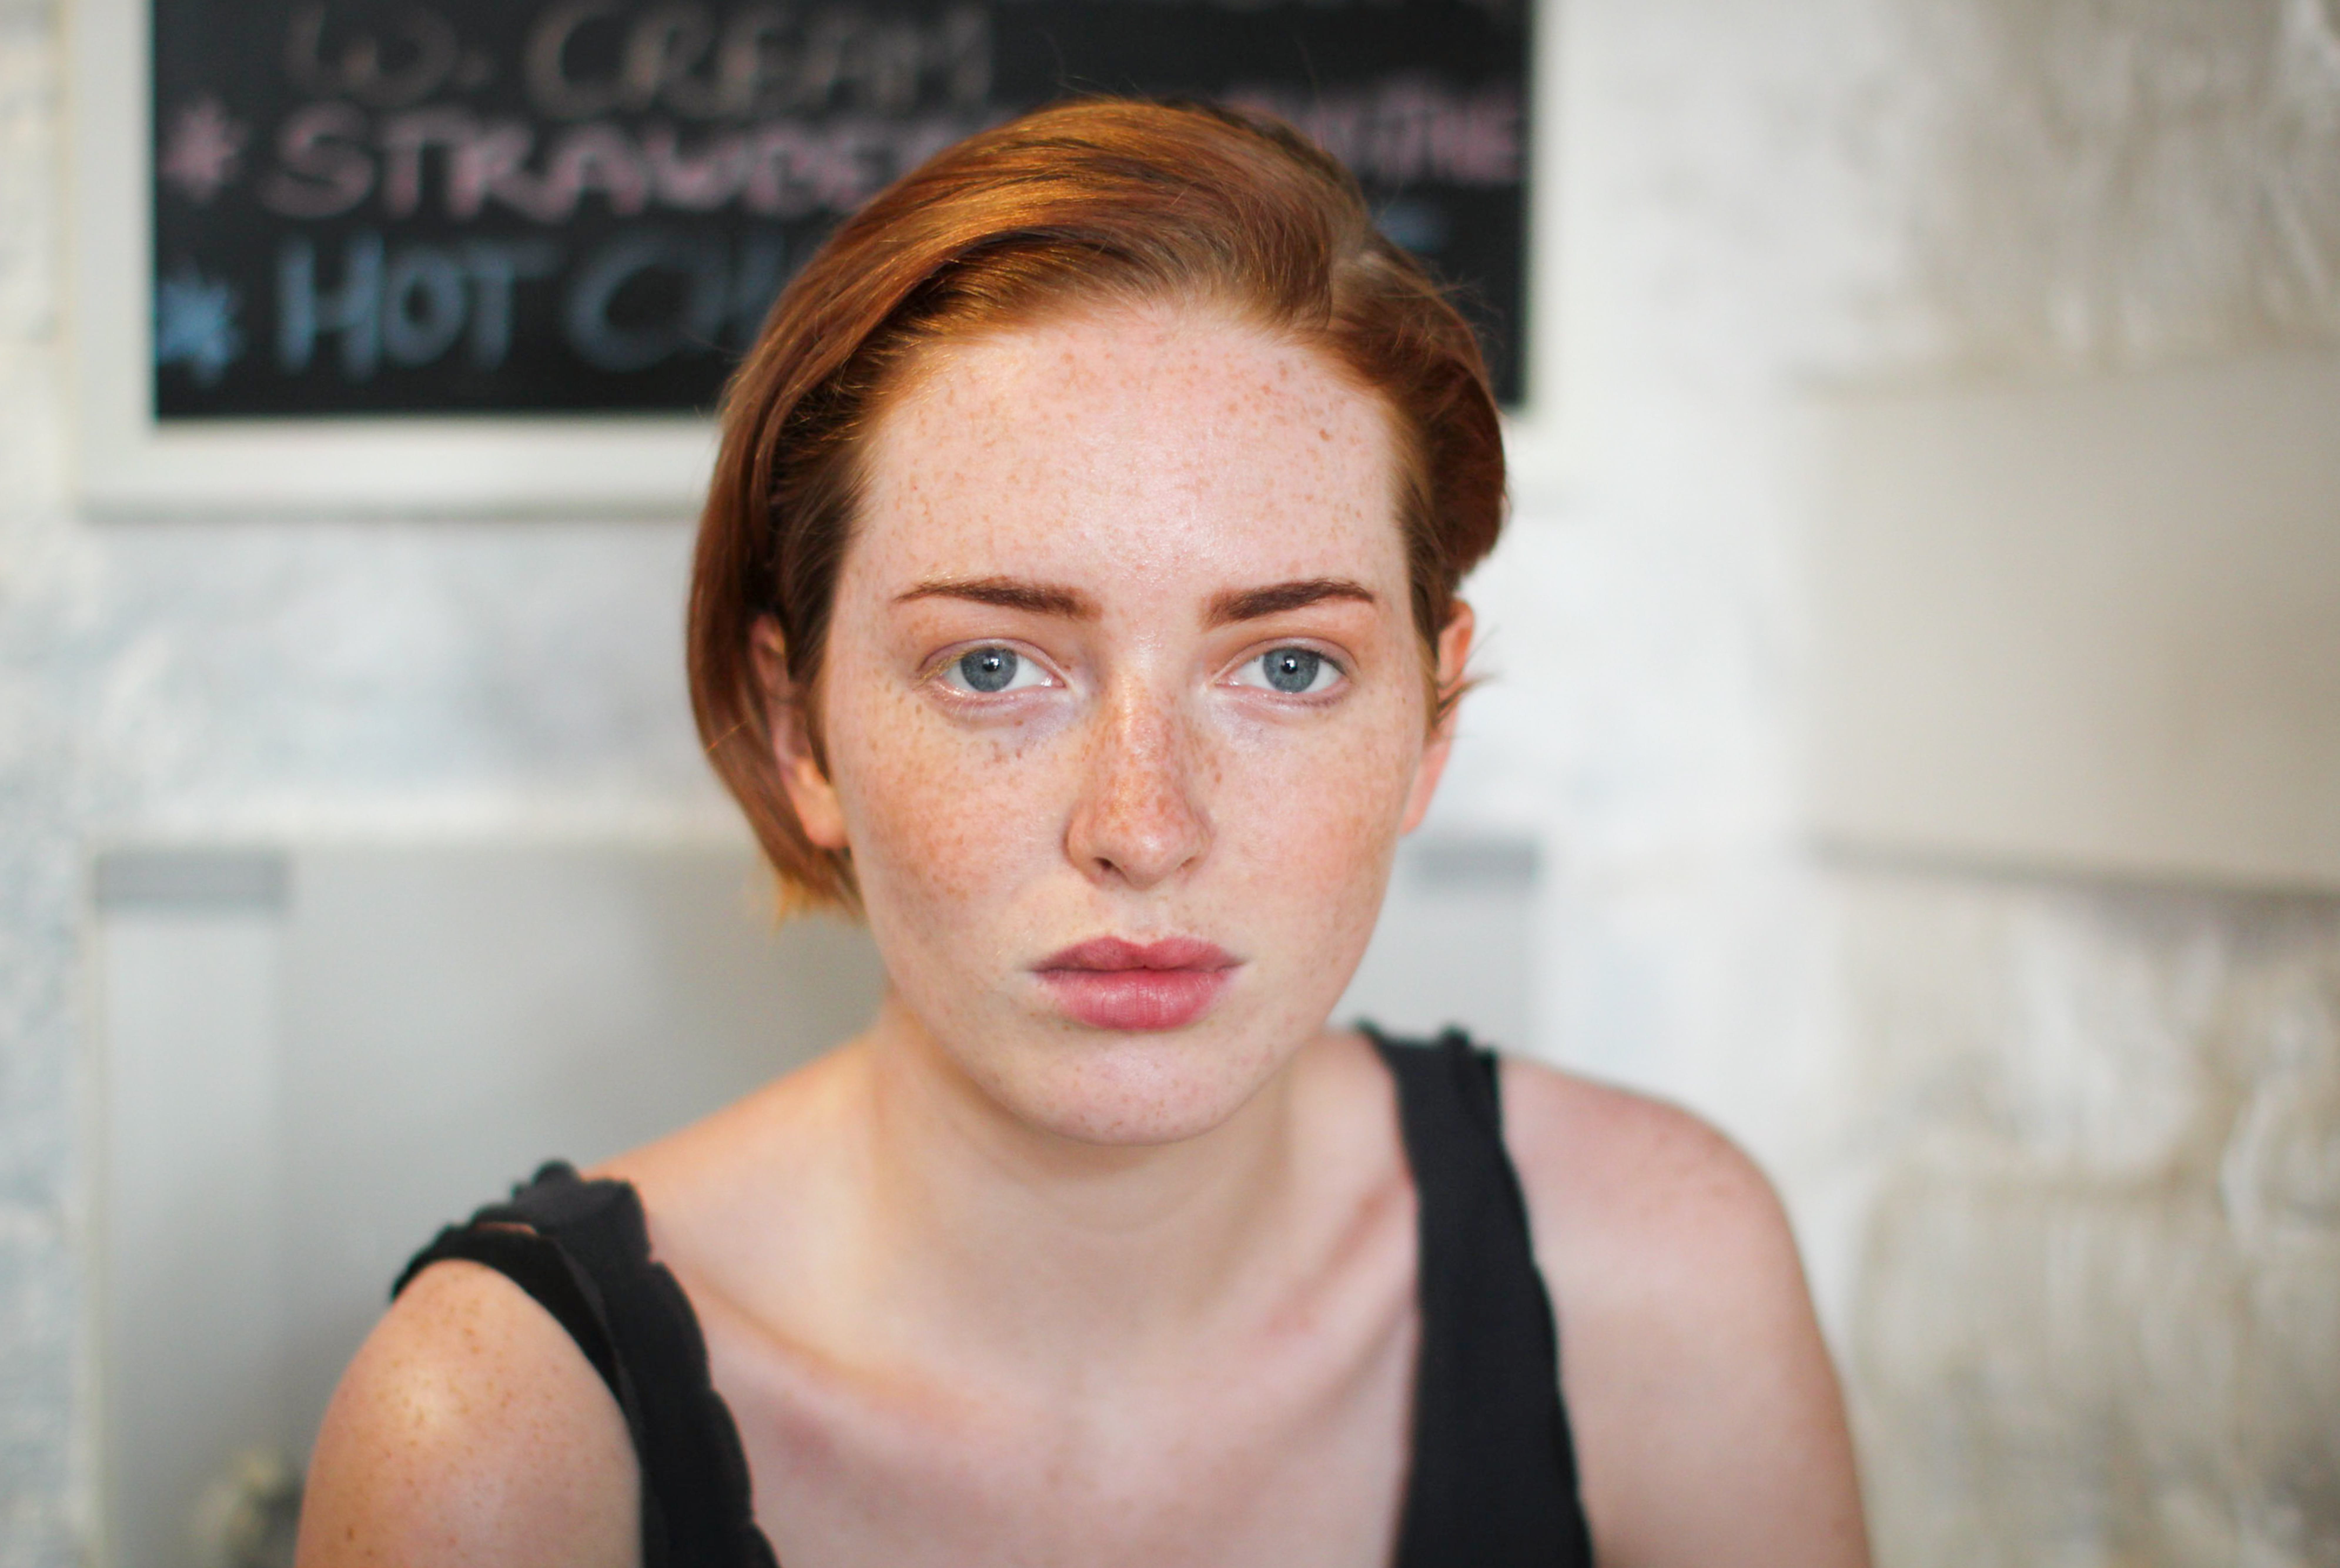 Headshot of woman with normal healthy skin type